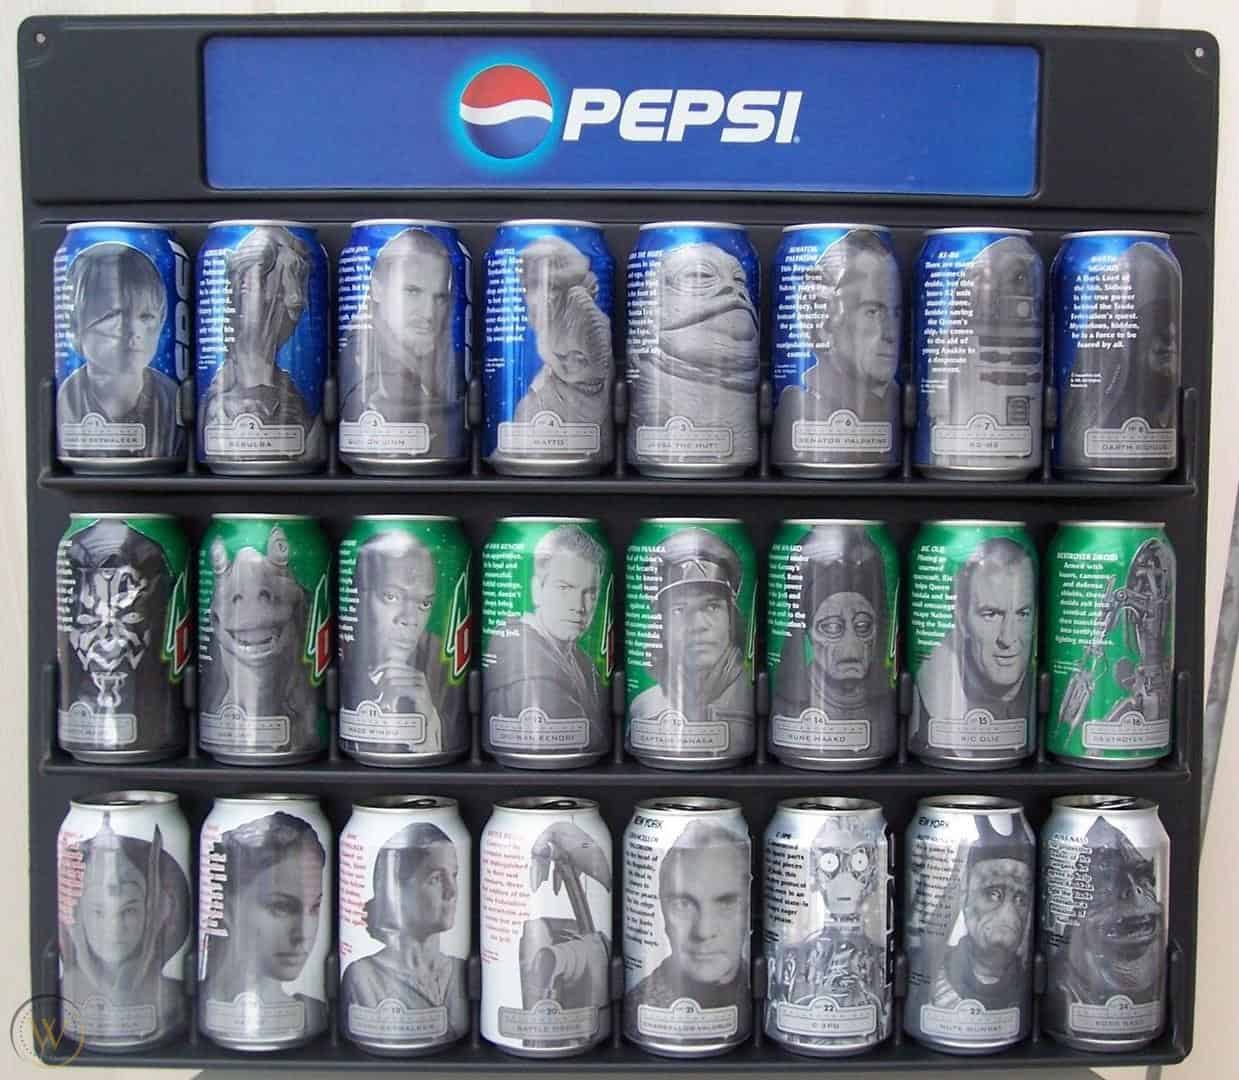 Star Wars preqels advertising on Pepsi cans